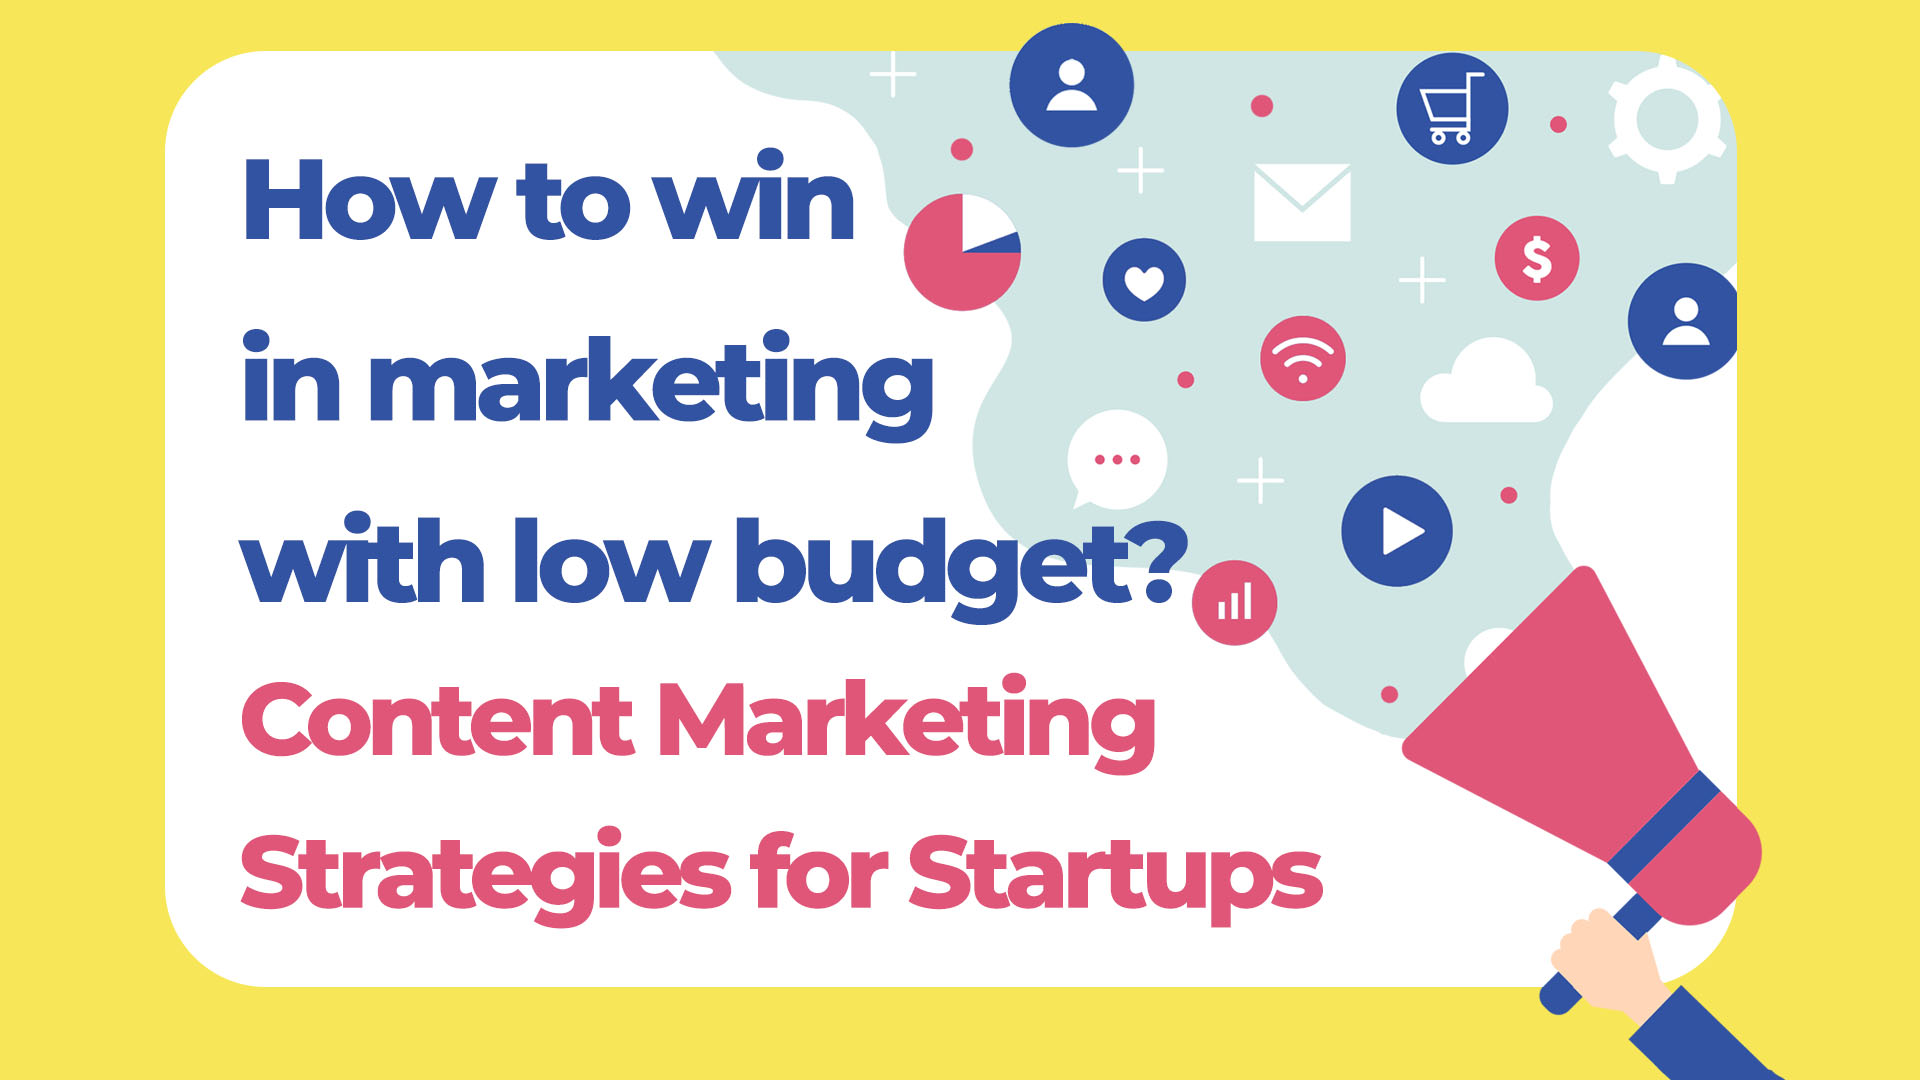 How to win in marketing with low budget? Content Marketing Strategies for Startups